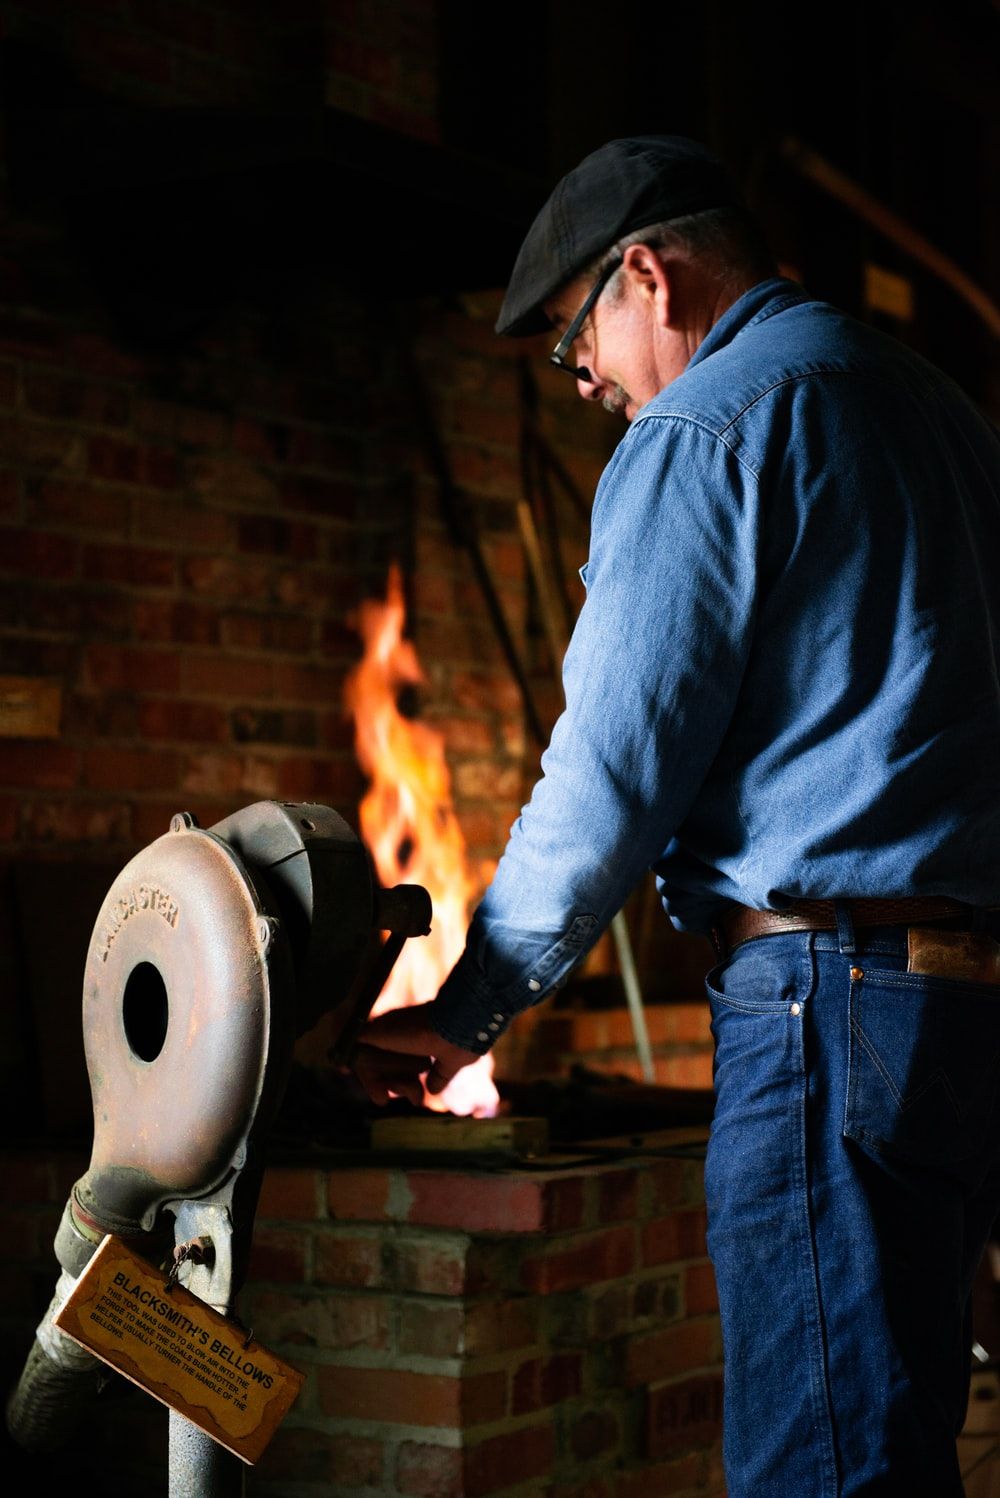 Blacksmith Picture. Download Free Image